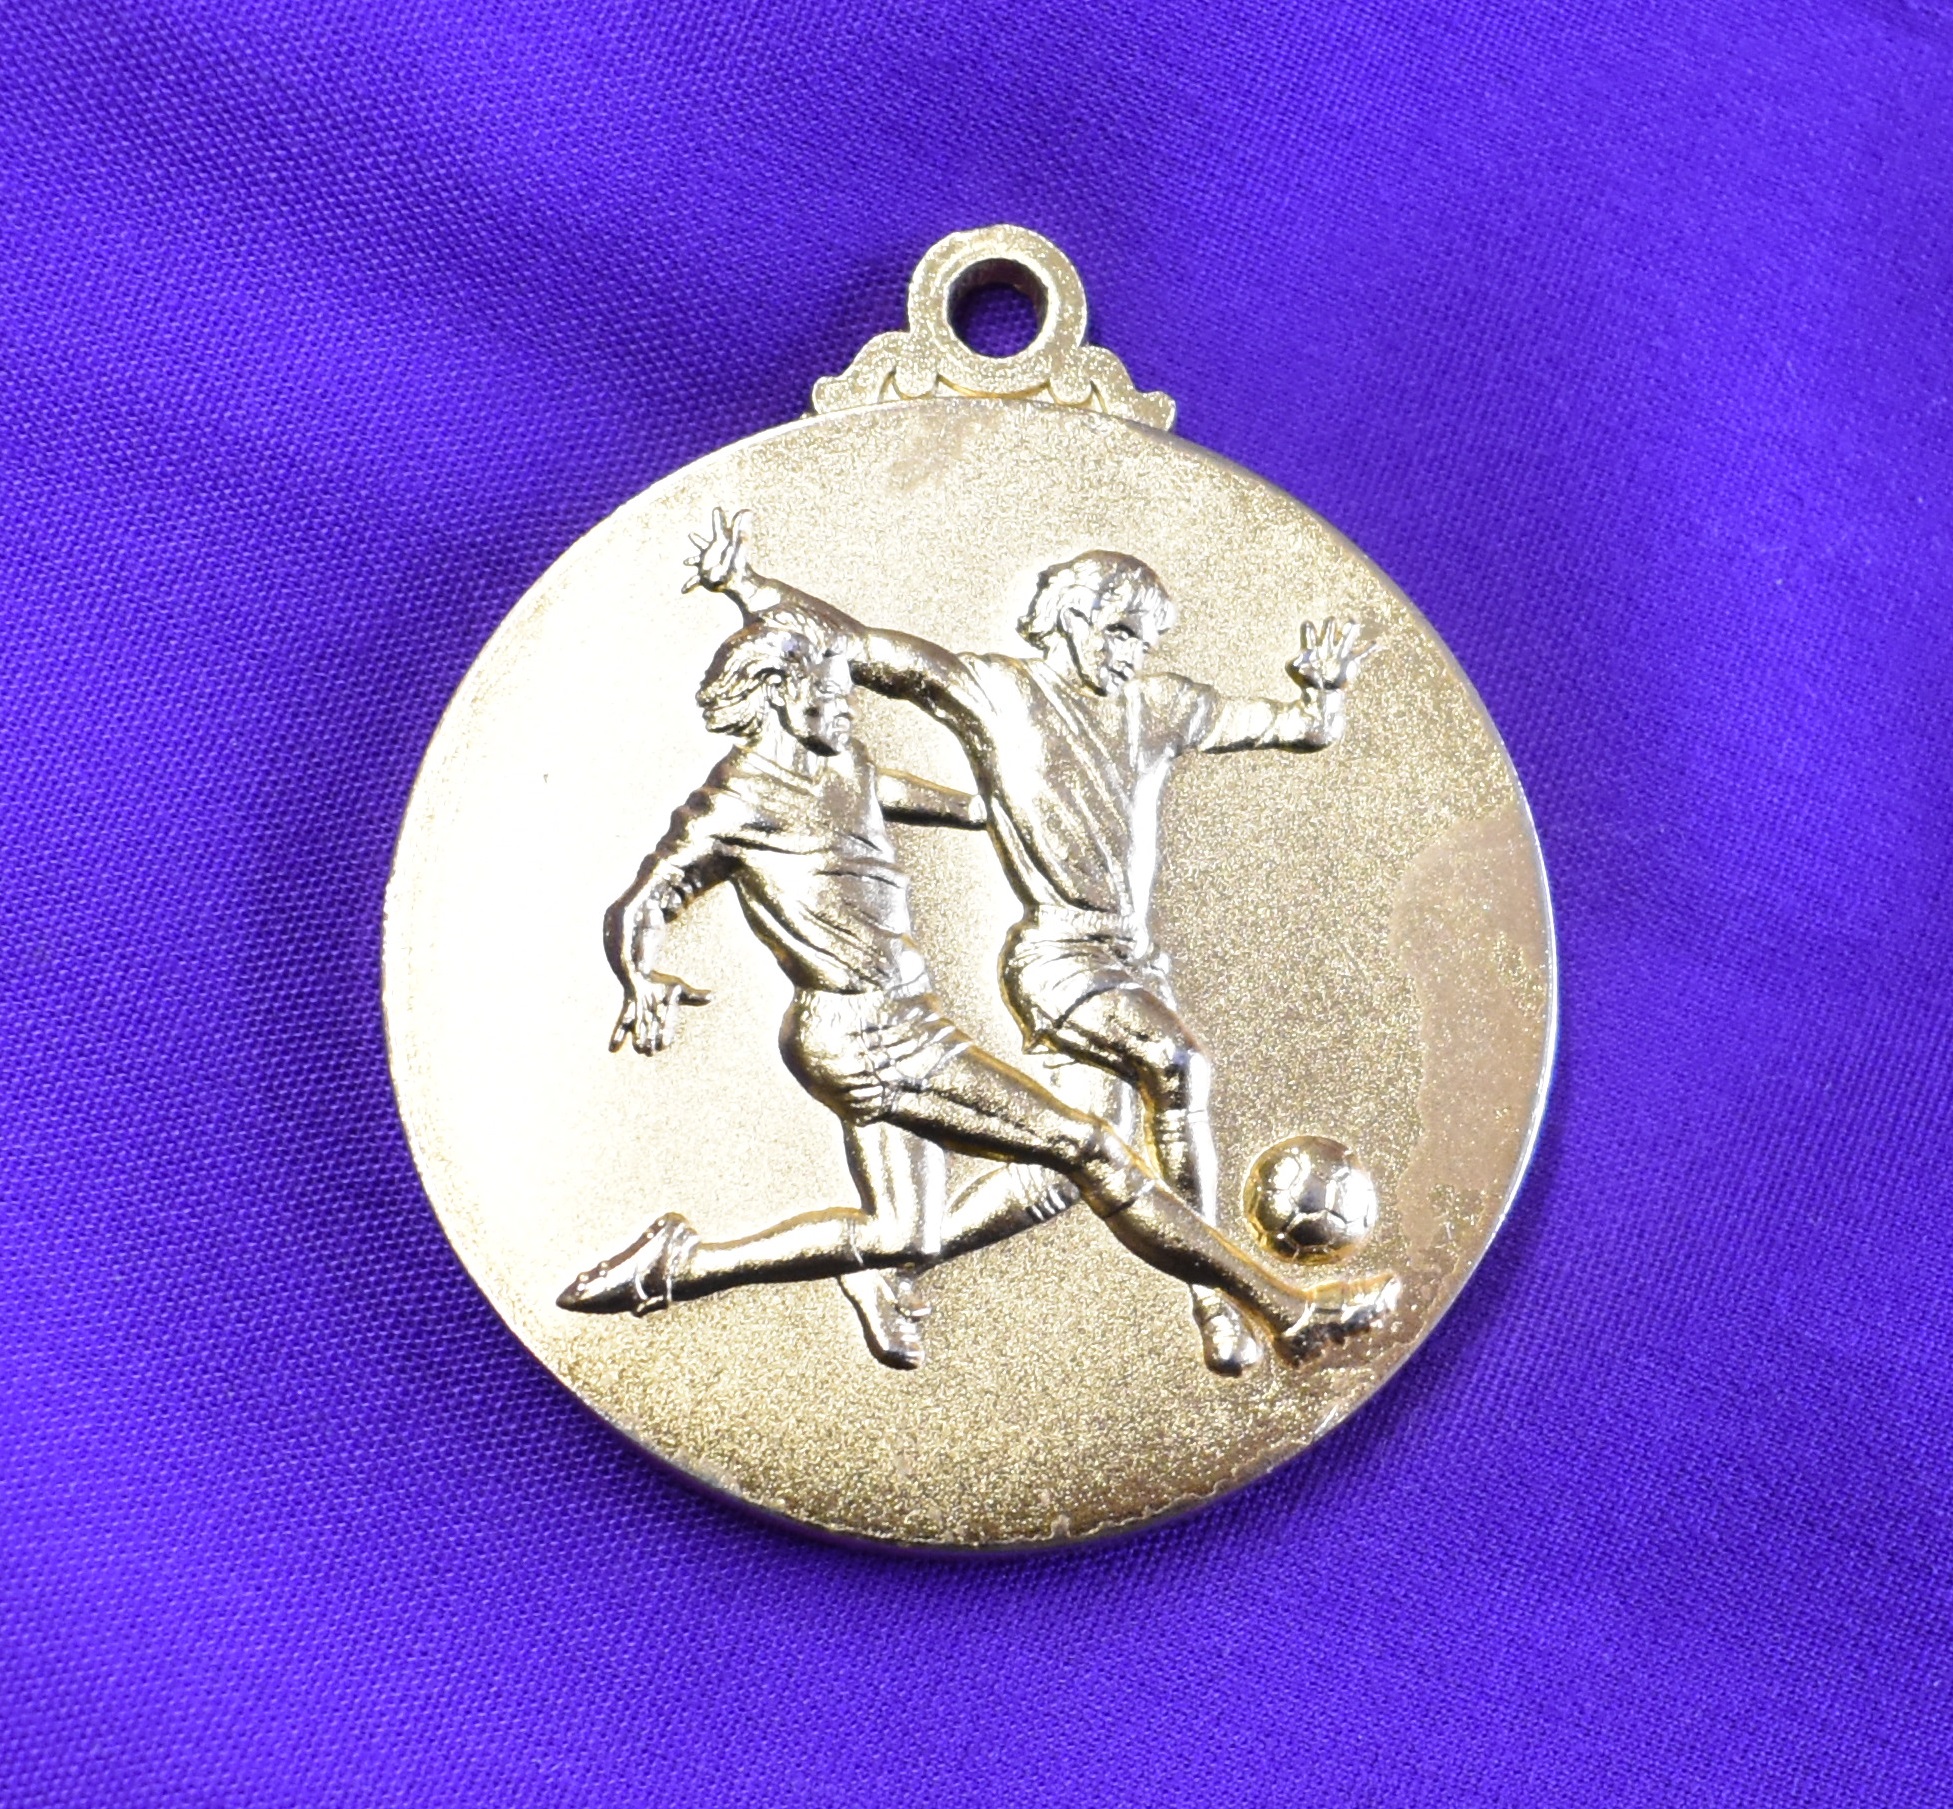 An engraved medal presented to a Manchester United player on the 20th July 1997 for the pre season